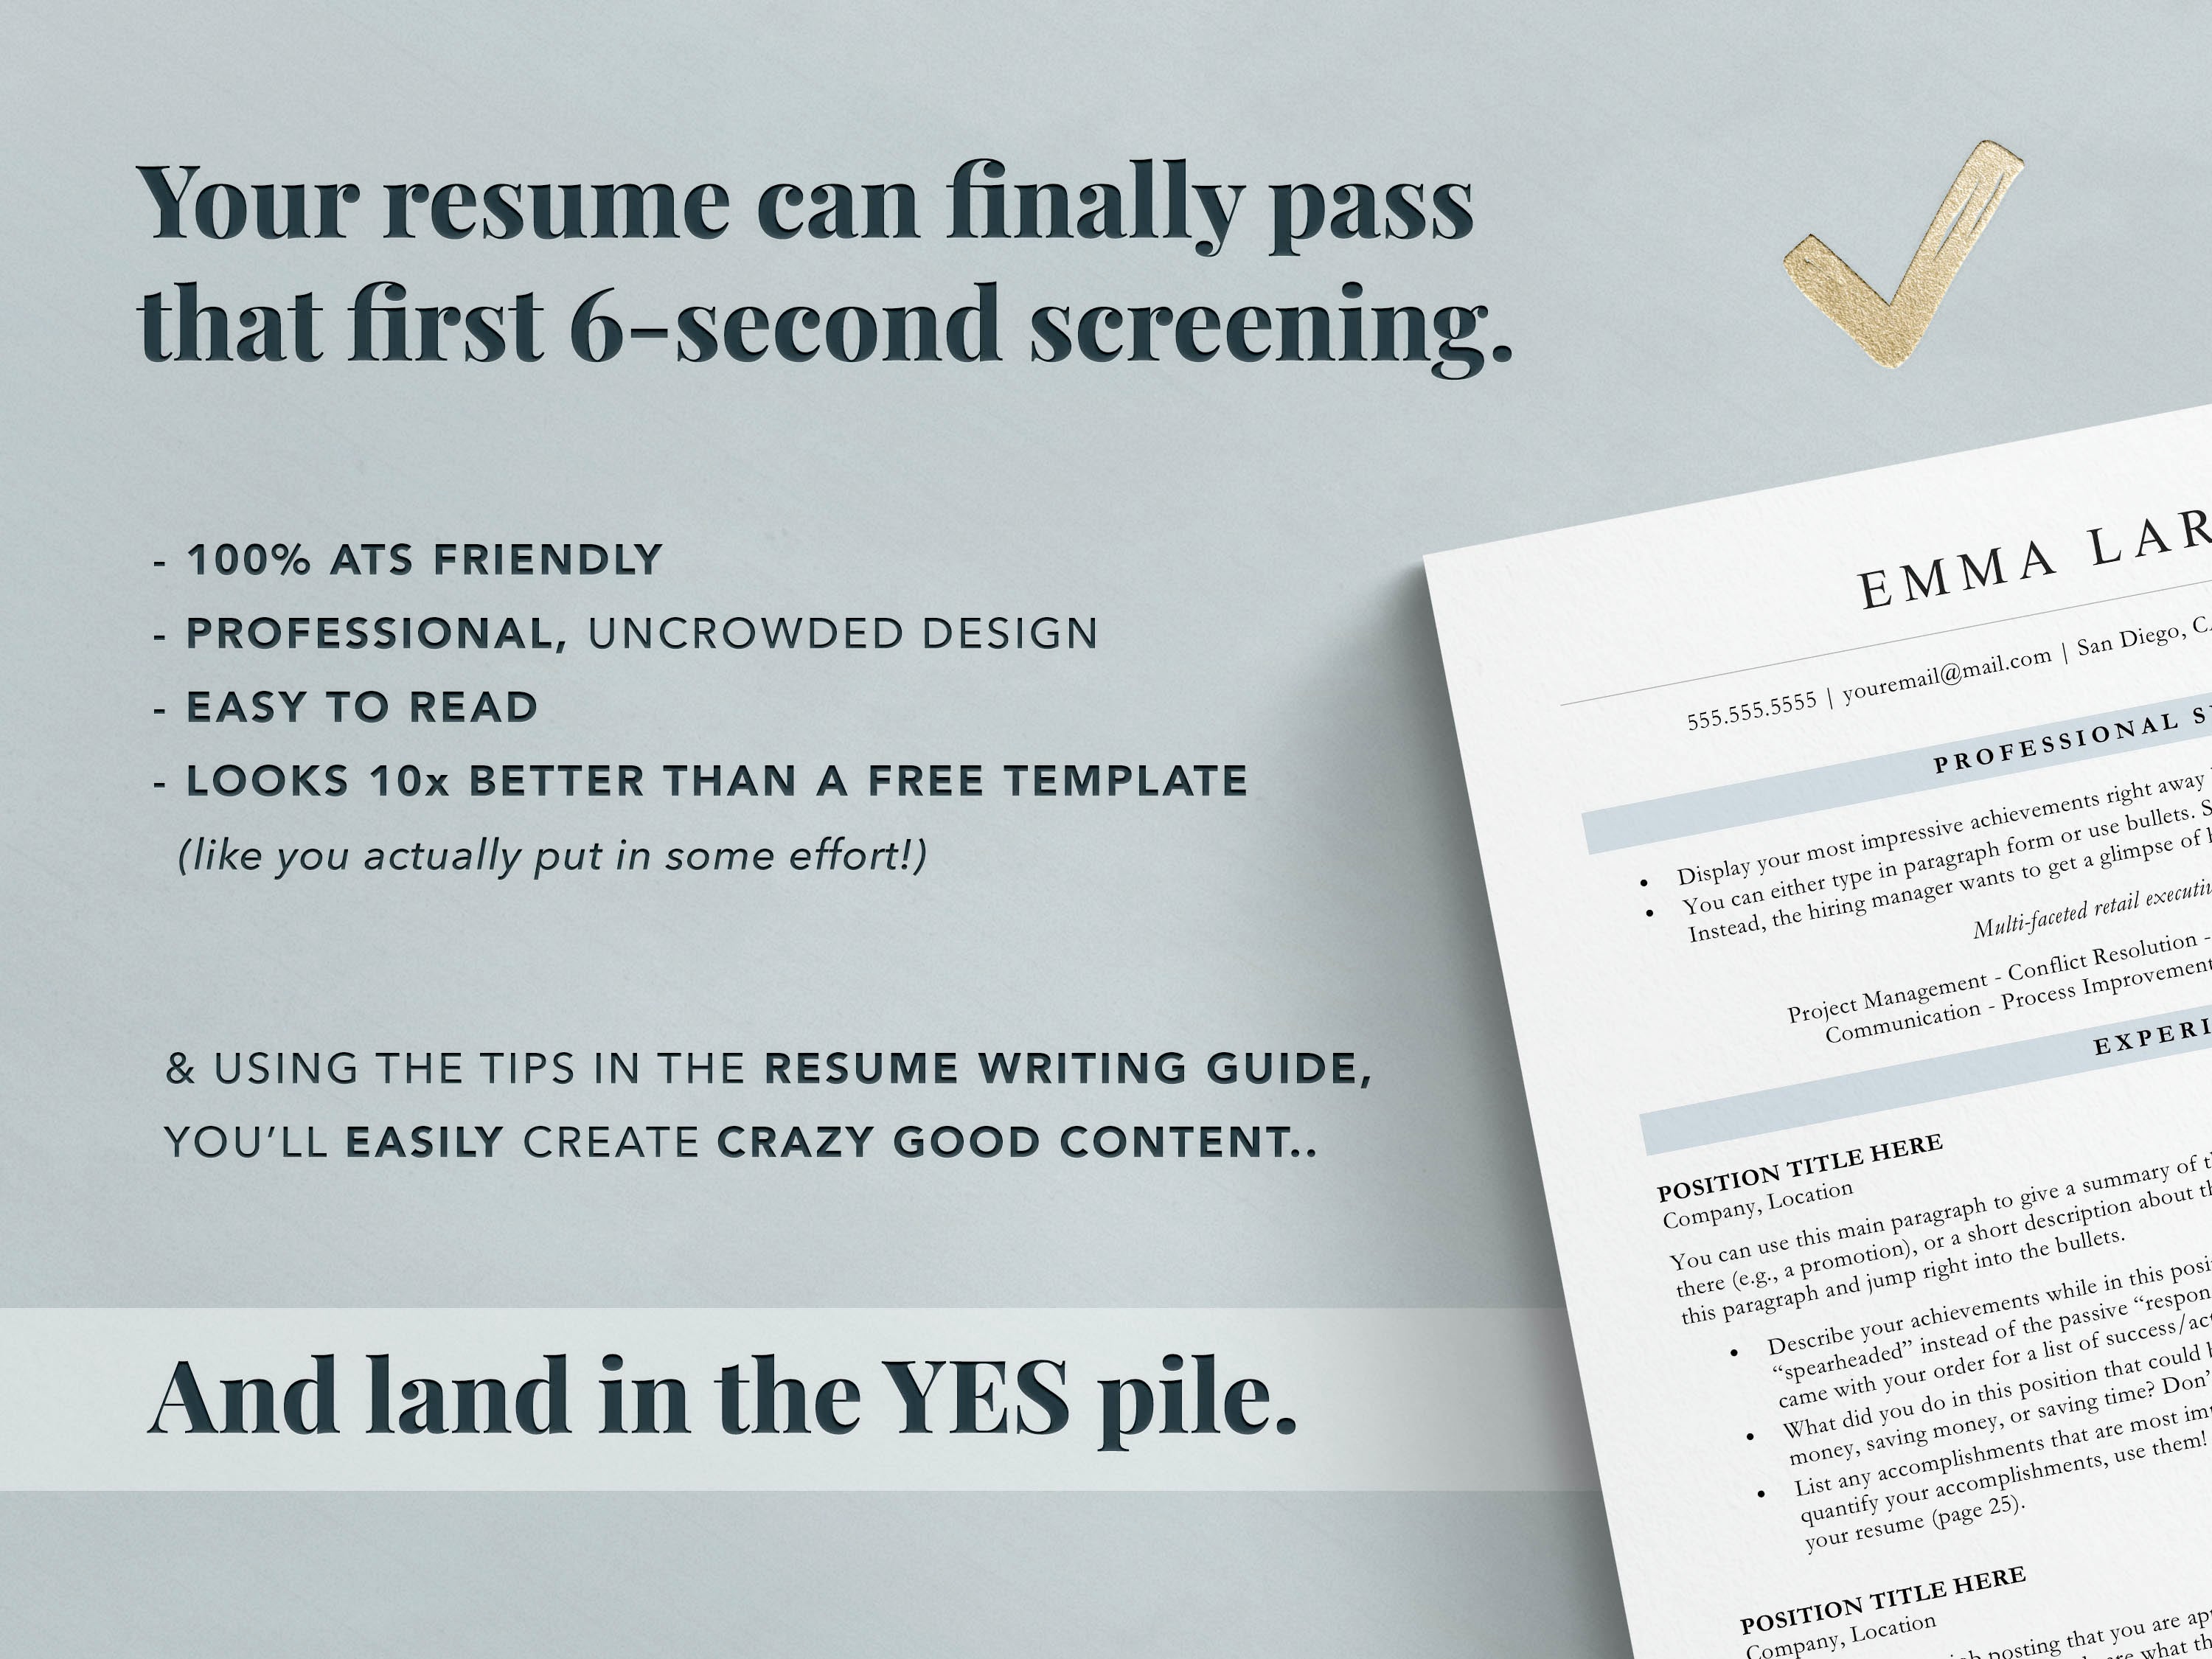 ats friendly one column resume template